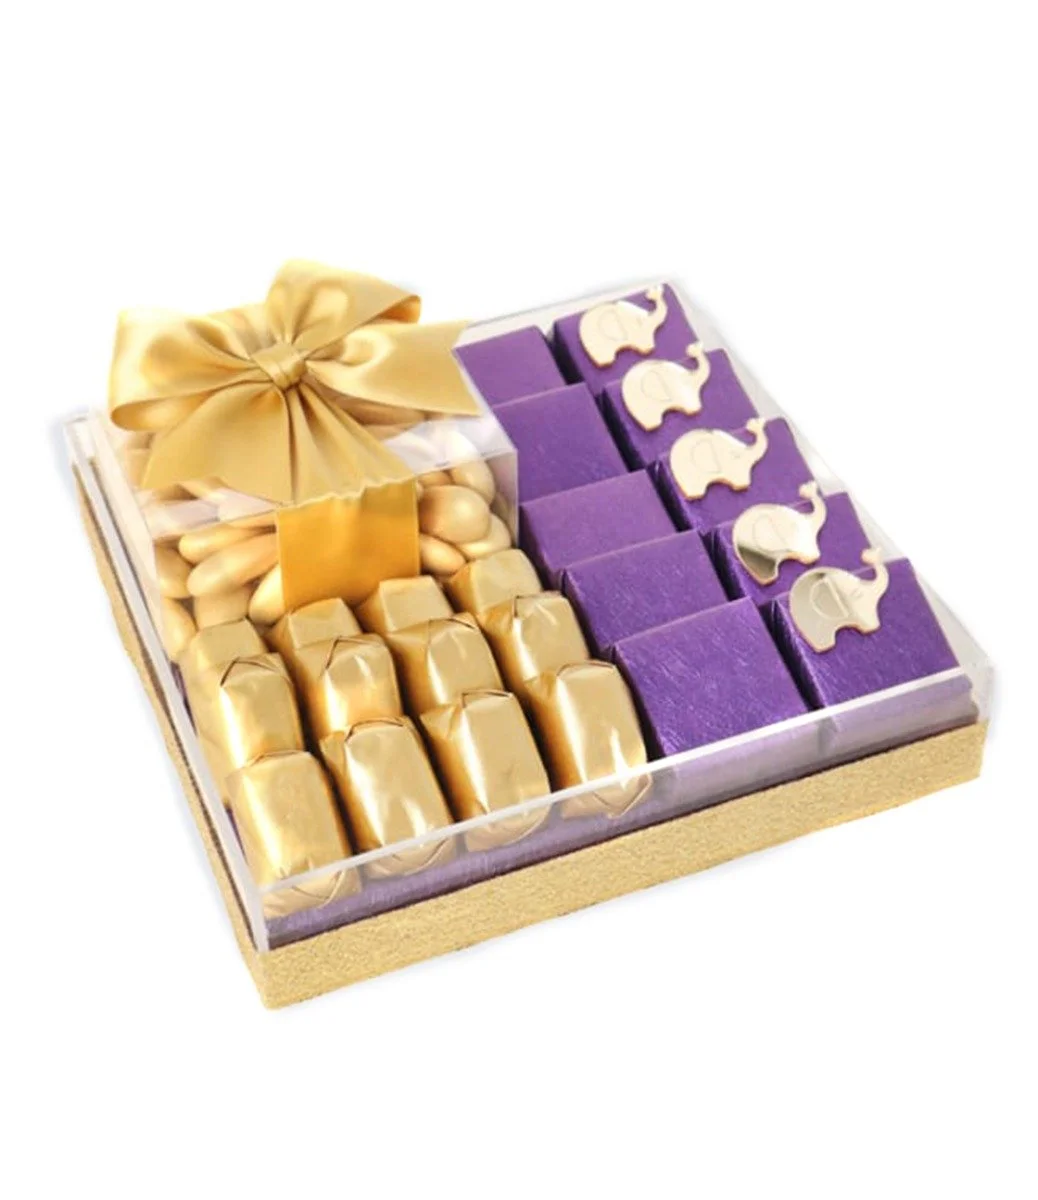 Luxury Diwali Chocolate And Almond Dragees Acrylic Tray by Le Chocolatier